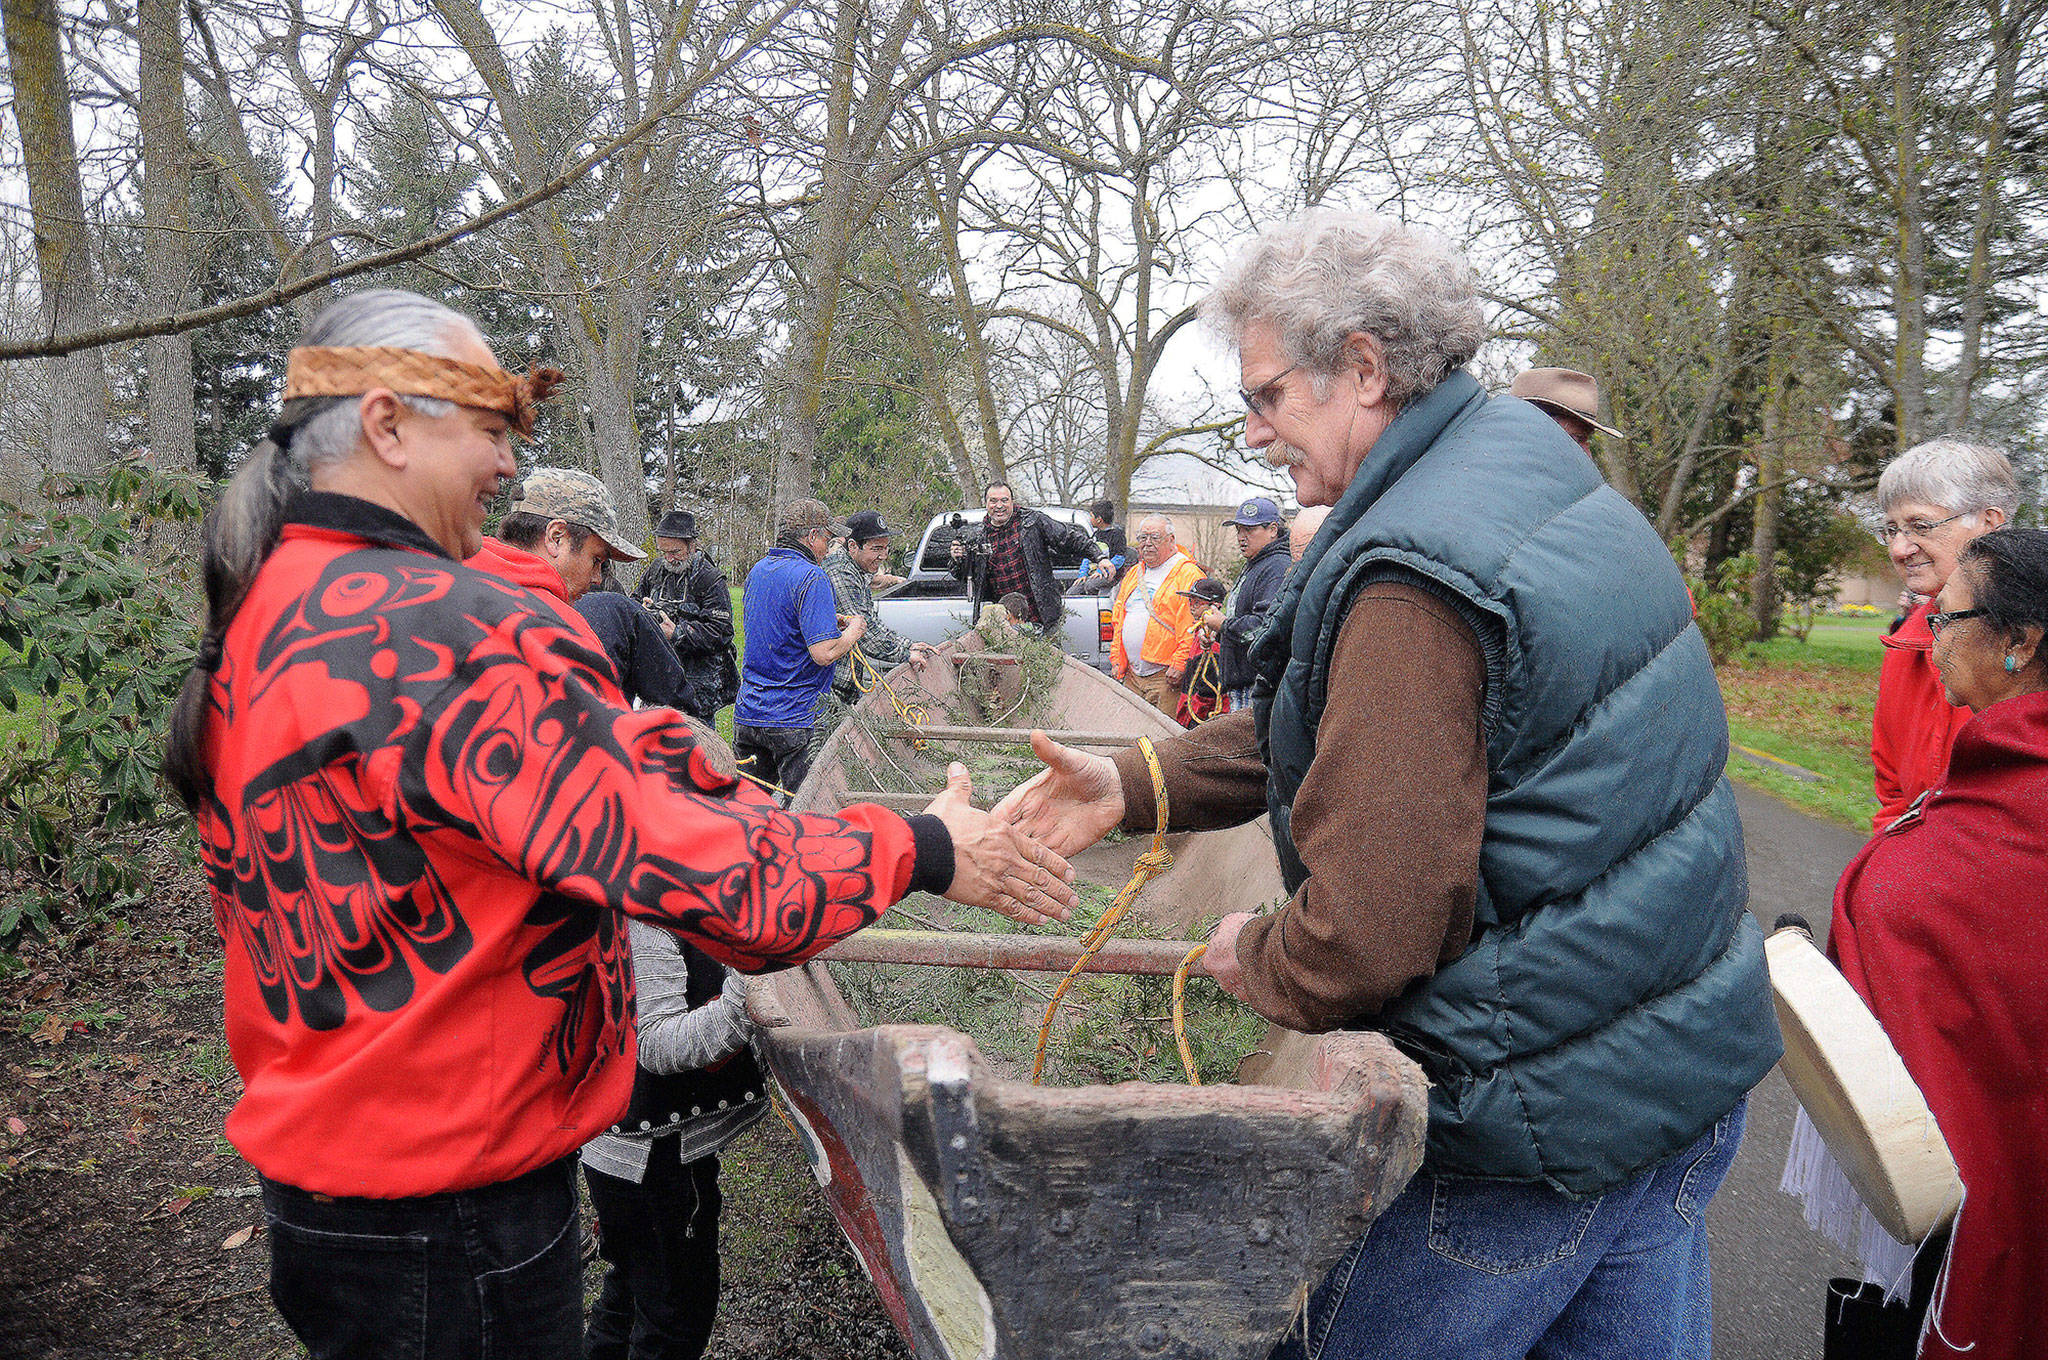 Tribal members prepare a canoe before it’s removed from Pioneer Memorial Park in Sequim in this file photo from April 2017. The story of the canoe’s journey from the park to the West End is the topic of Sunday’s History Tales presentation. (Michael Dashiell/Olympic Peninsula News Group)